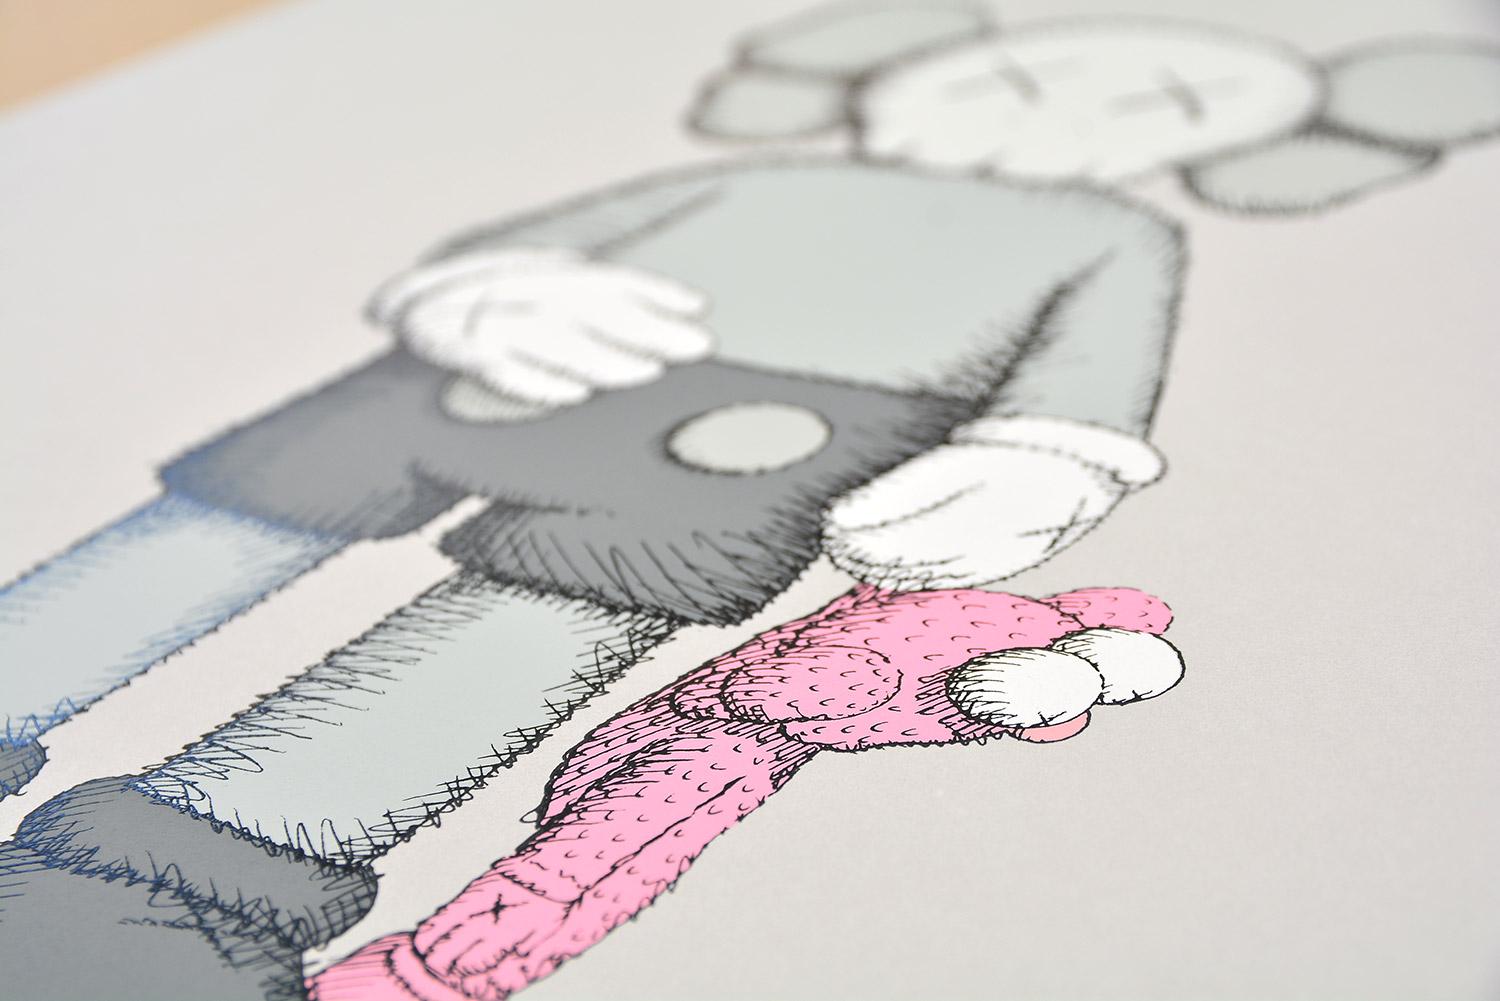 KAWS - SHARE
Date of creation: 2022
Medium: Screen print on Stonehenge gray paper
Edition number: 118/500
Size: 50.8 x 40.6 cm
Condition: In mint conditions, brand new and never framed
Observations: Screen print on Stonehenge gray paper hand signed,